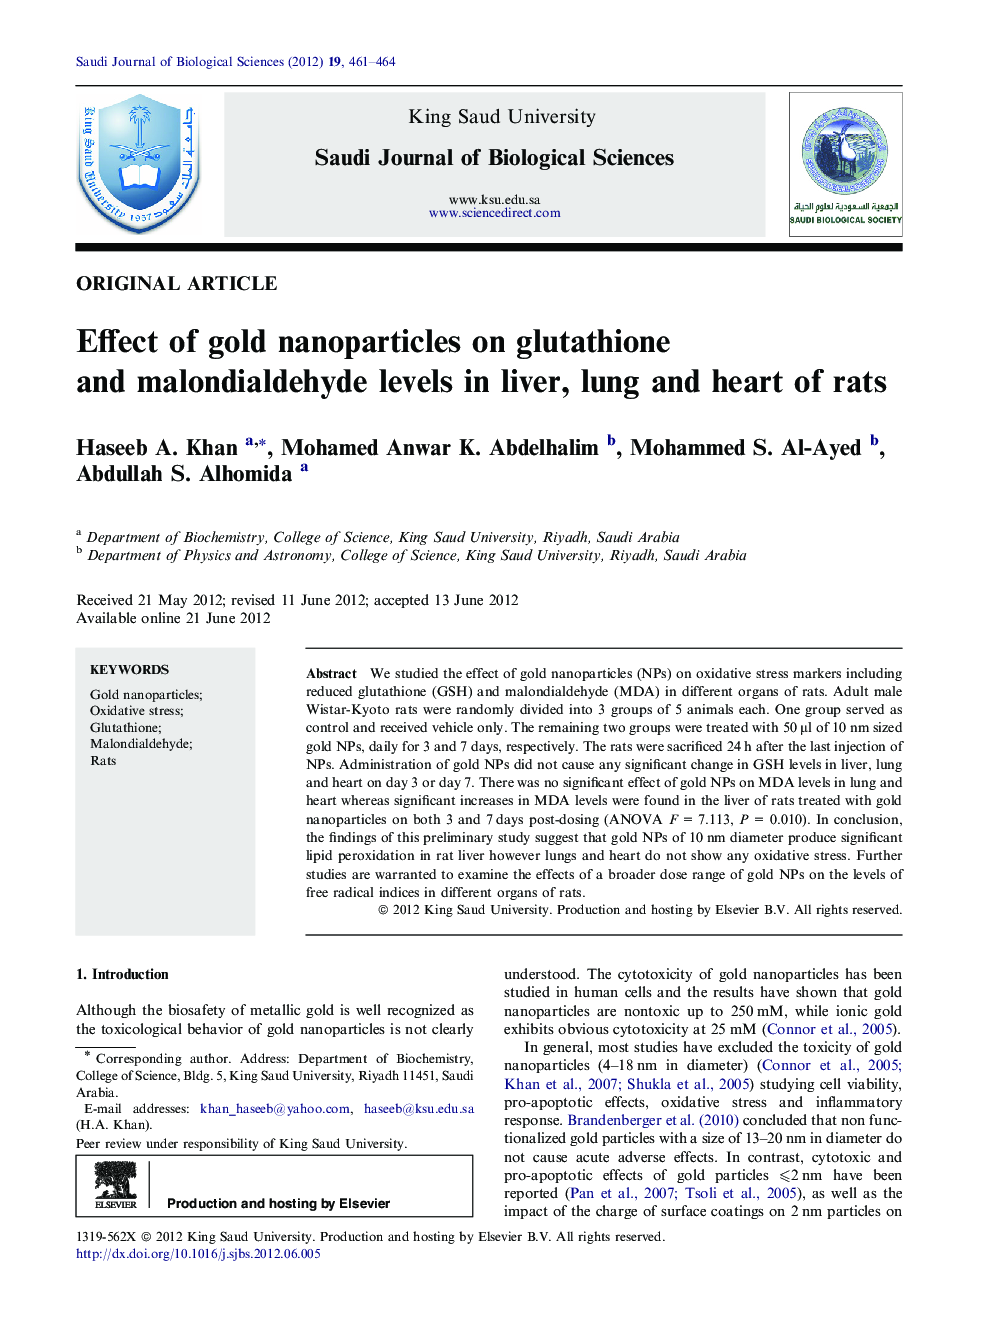 Effect of gold nanoparticles on glutathione and malondialdehyde levels in liver, lung and heart of rats 